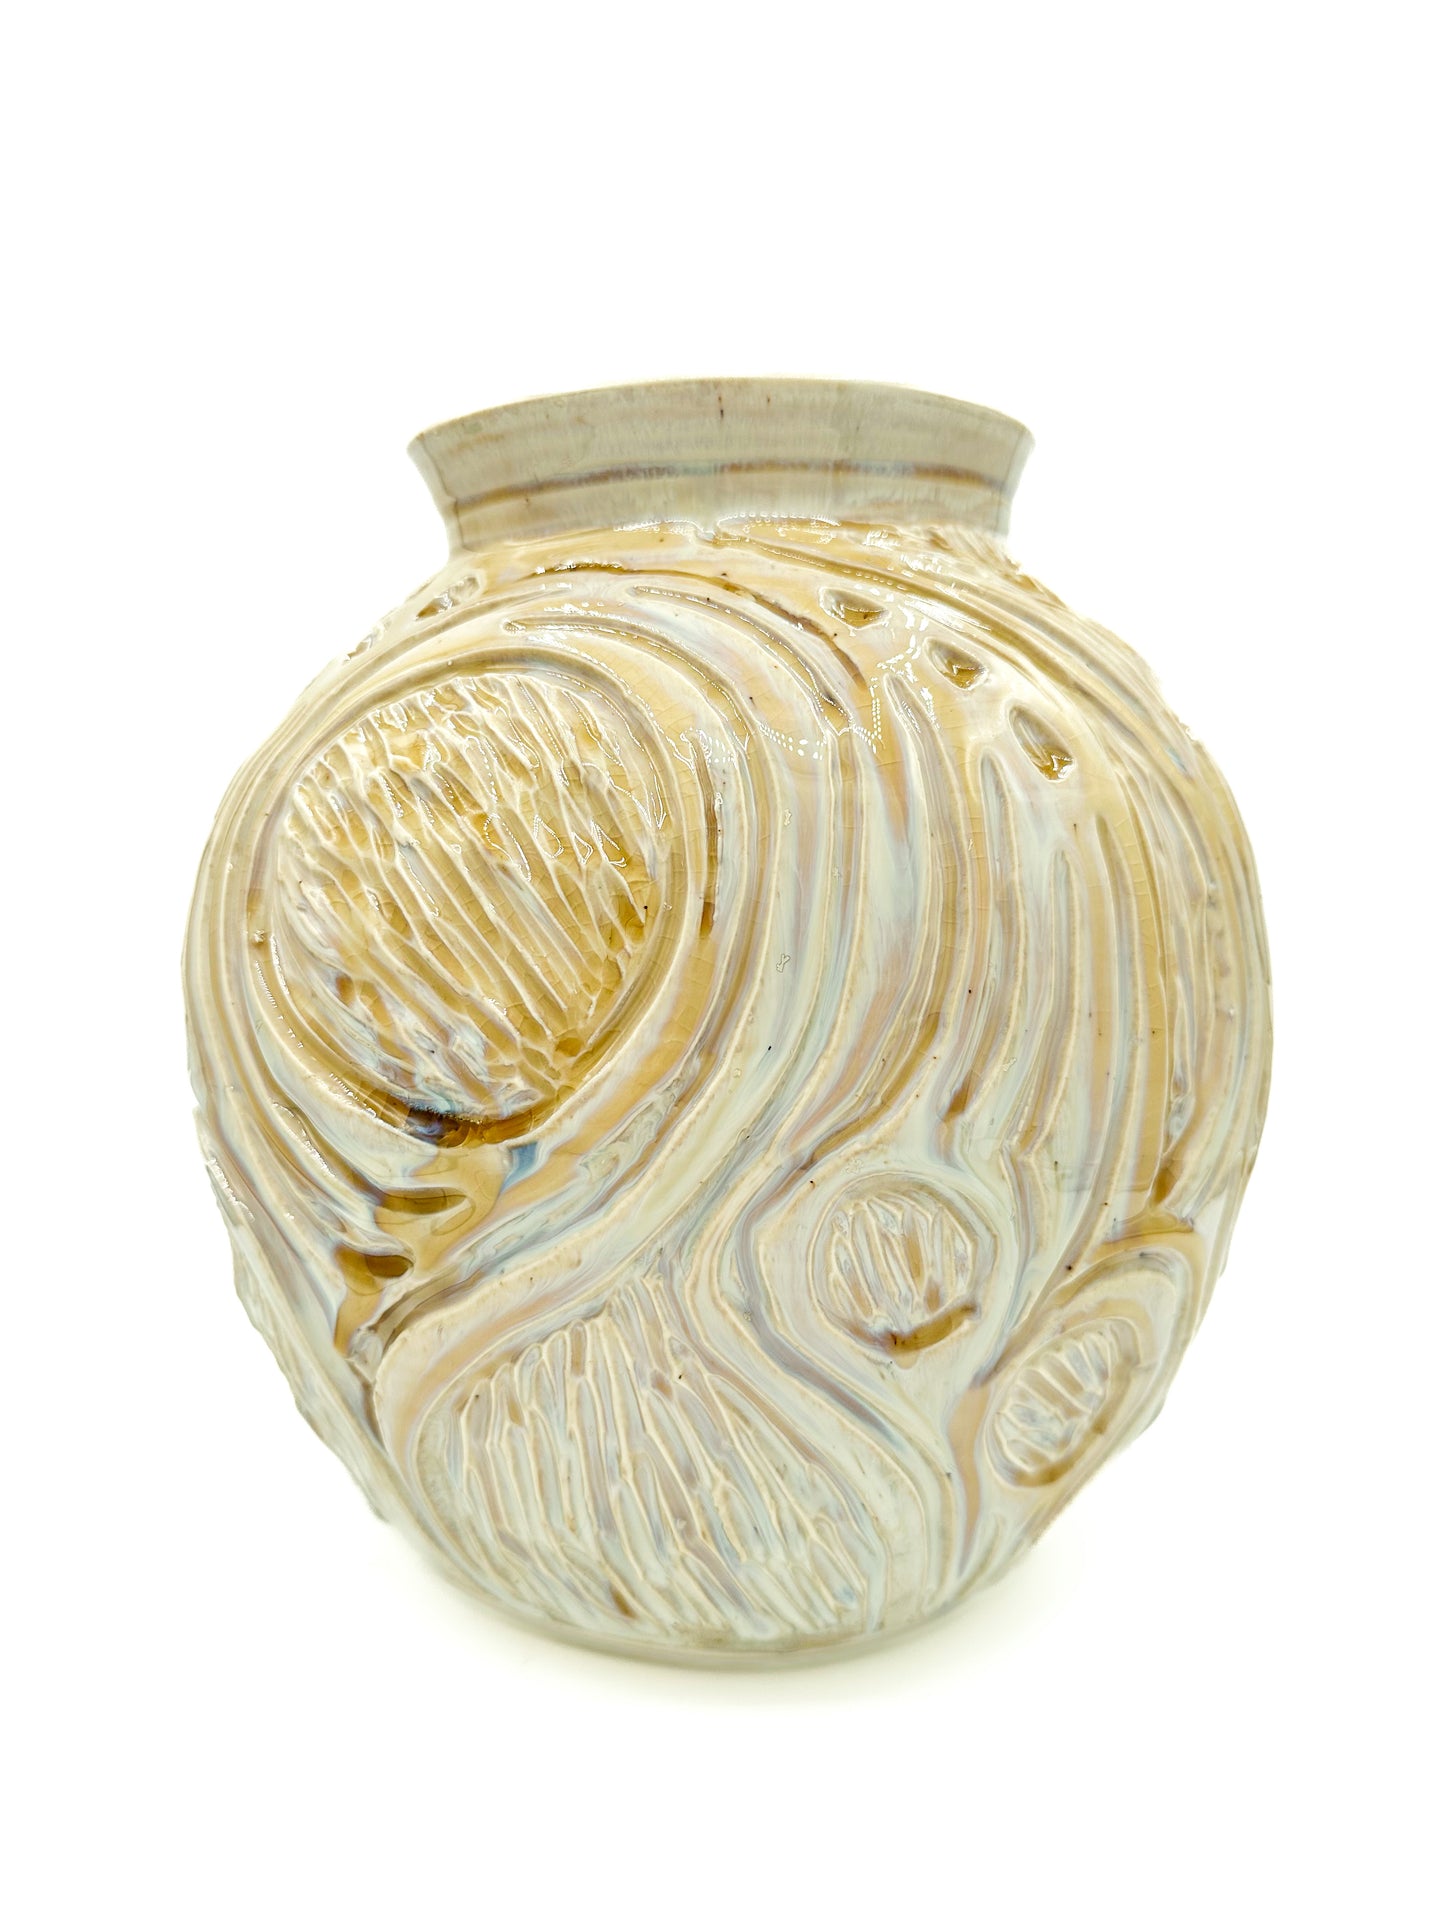 A Drink Well Collection : Iridescent Large Carved Vessel